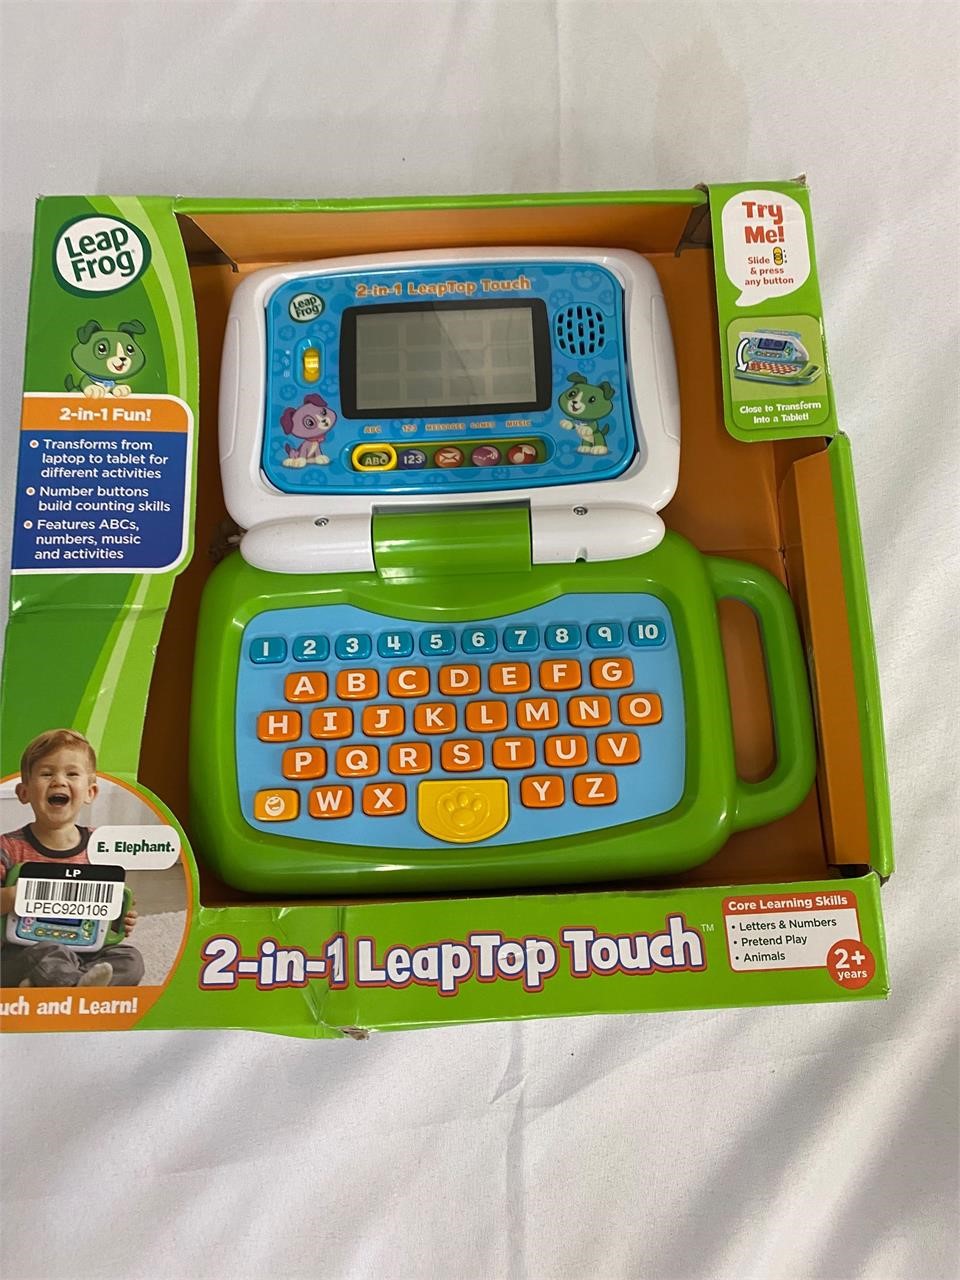 BRAND NEW Leap Frog 2-in-1 LeapTop Touch